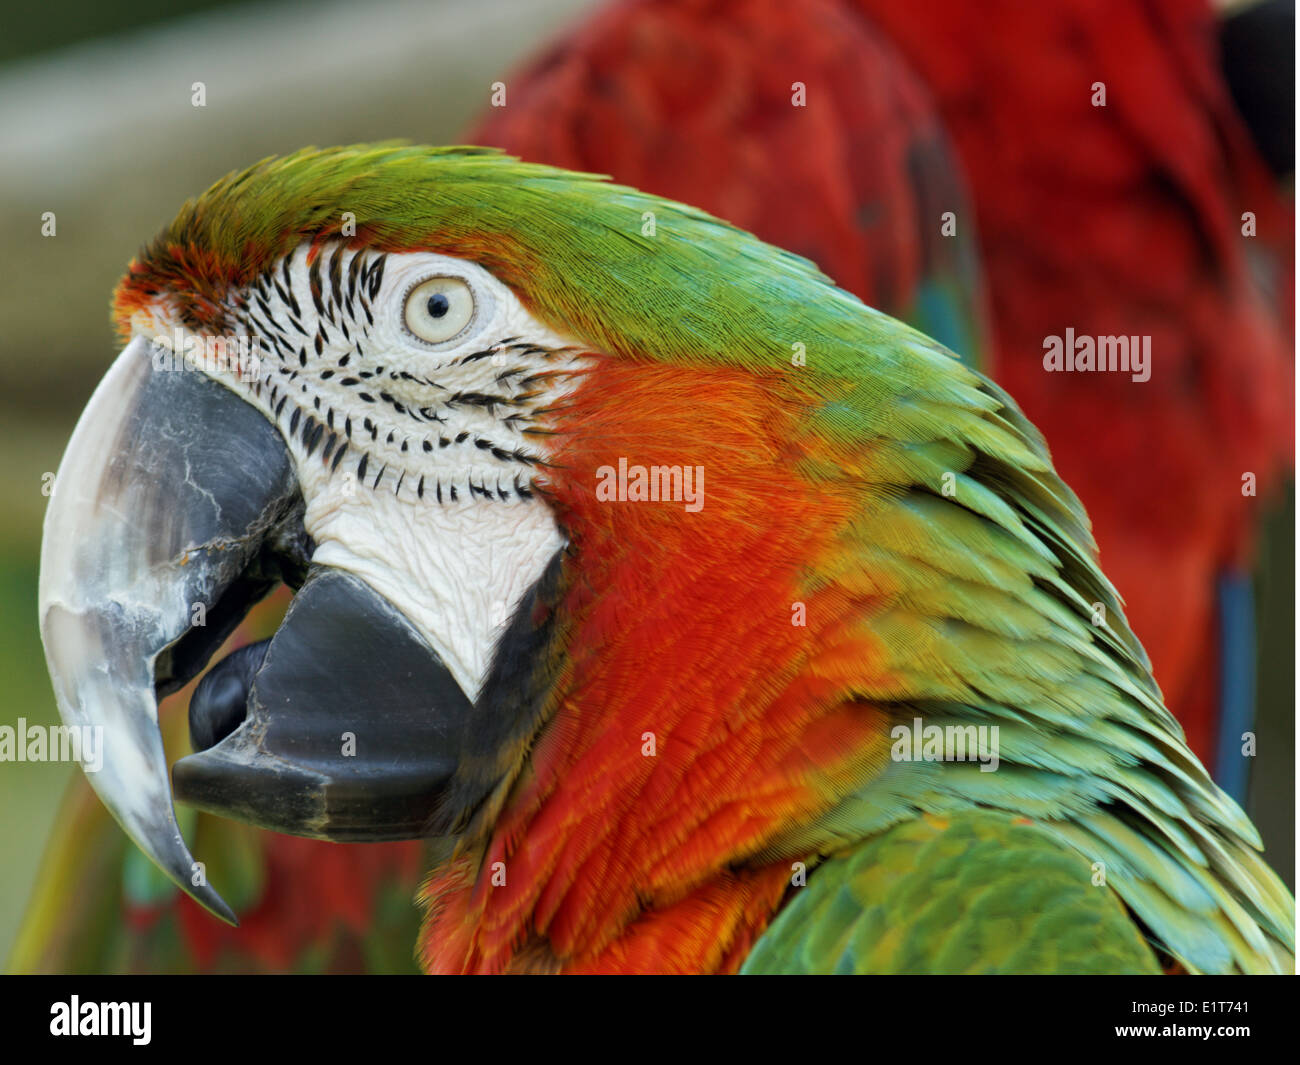 An extreme closeup of a Harlequin Macaw in profile Stock Photo